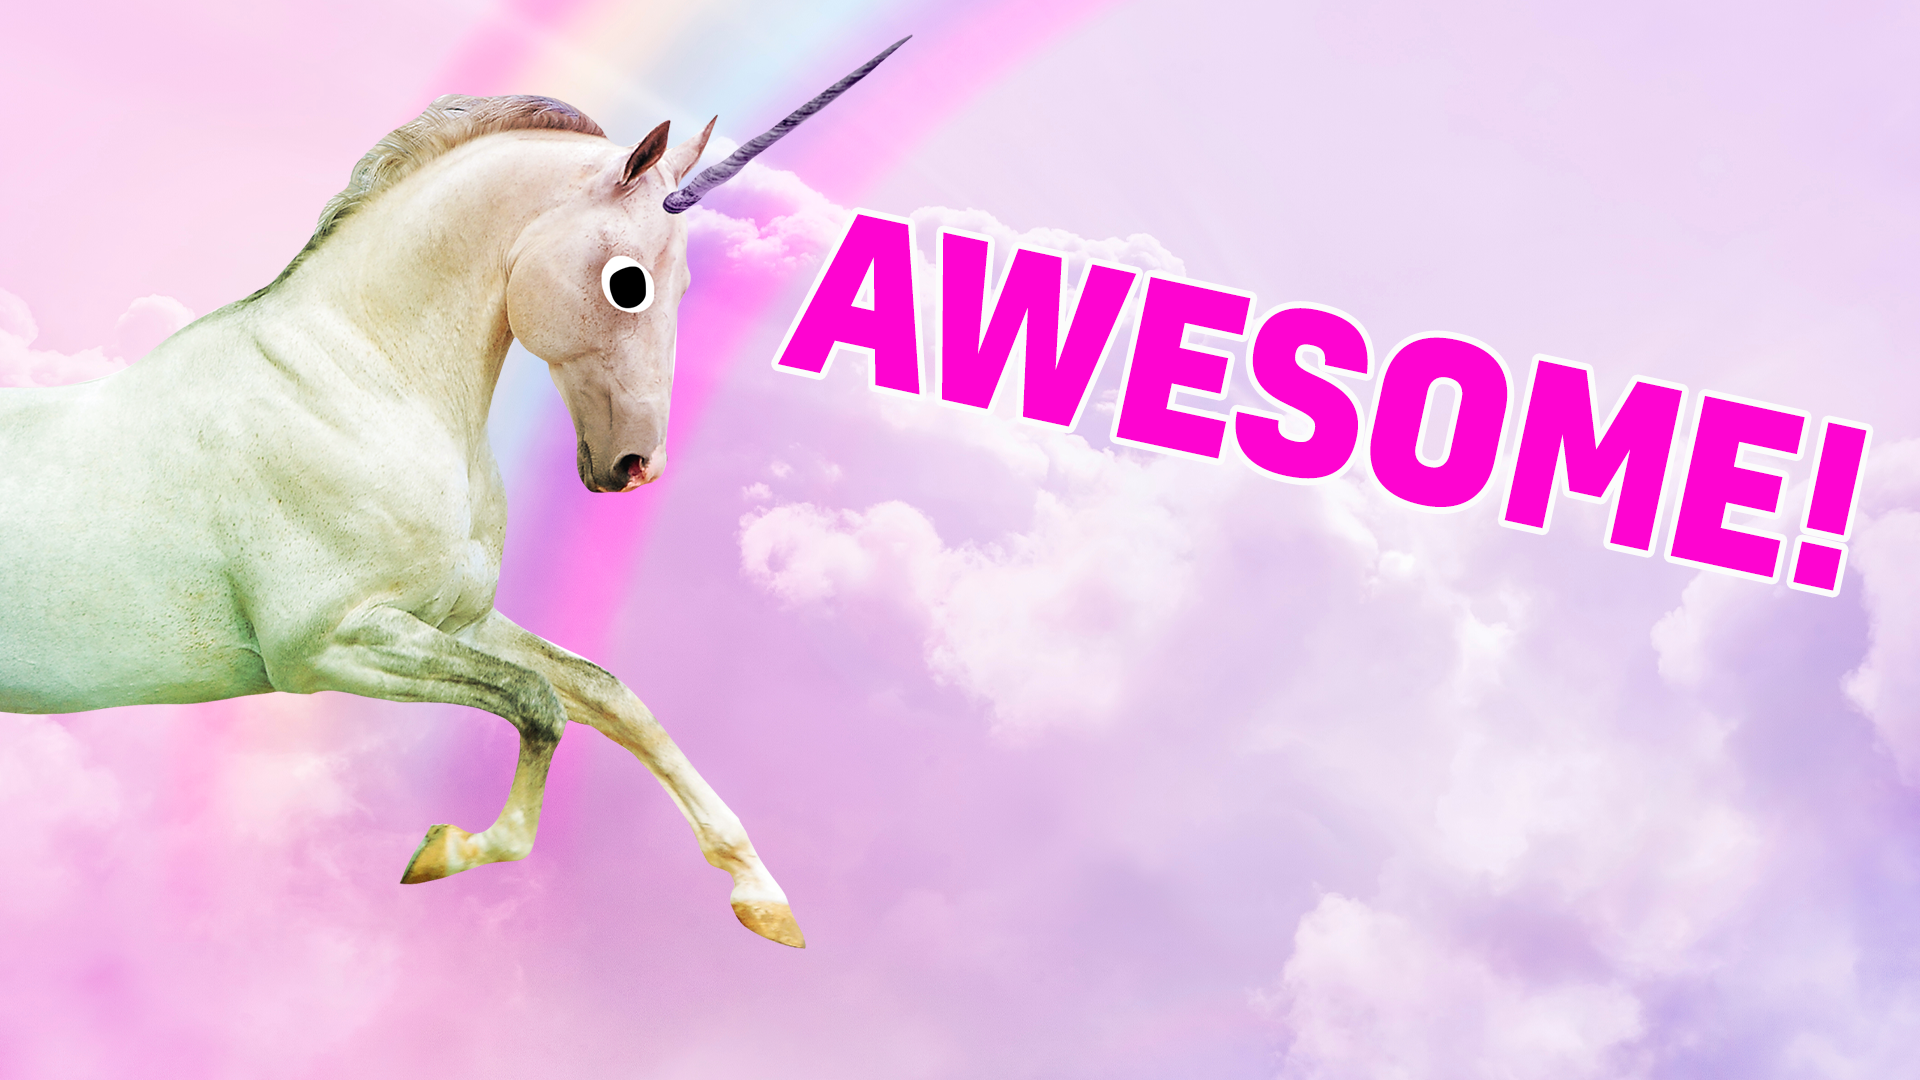 Magical! You got 10/10 and are officially a unicorn genius! Congrats!